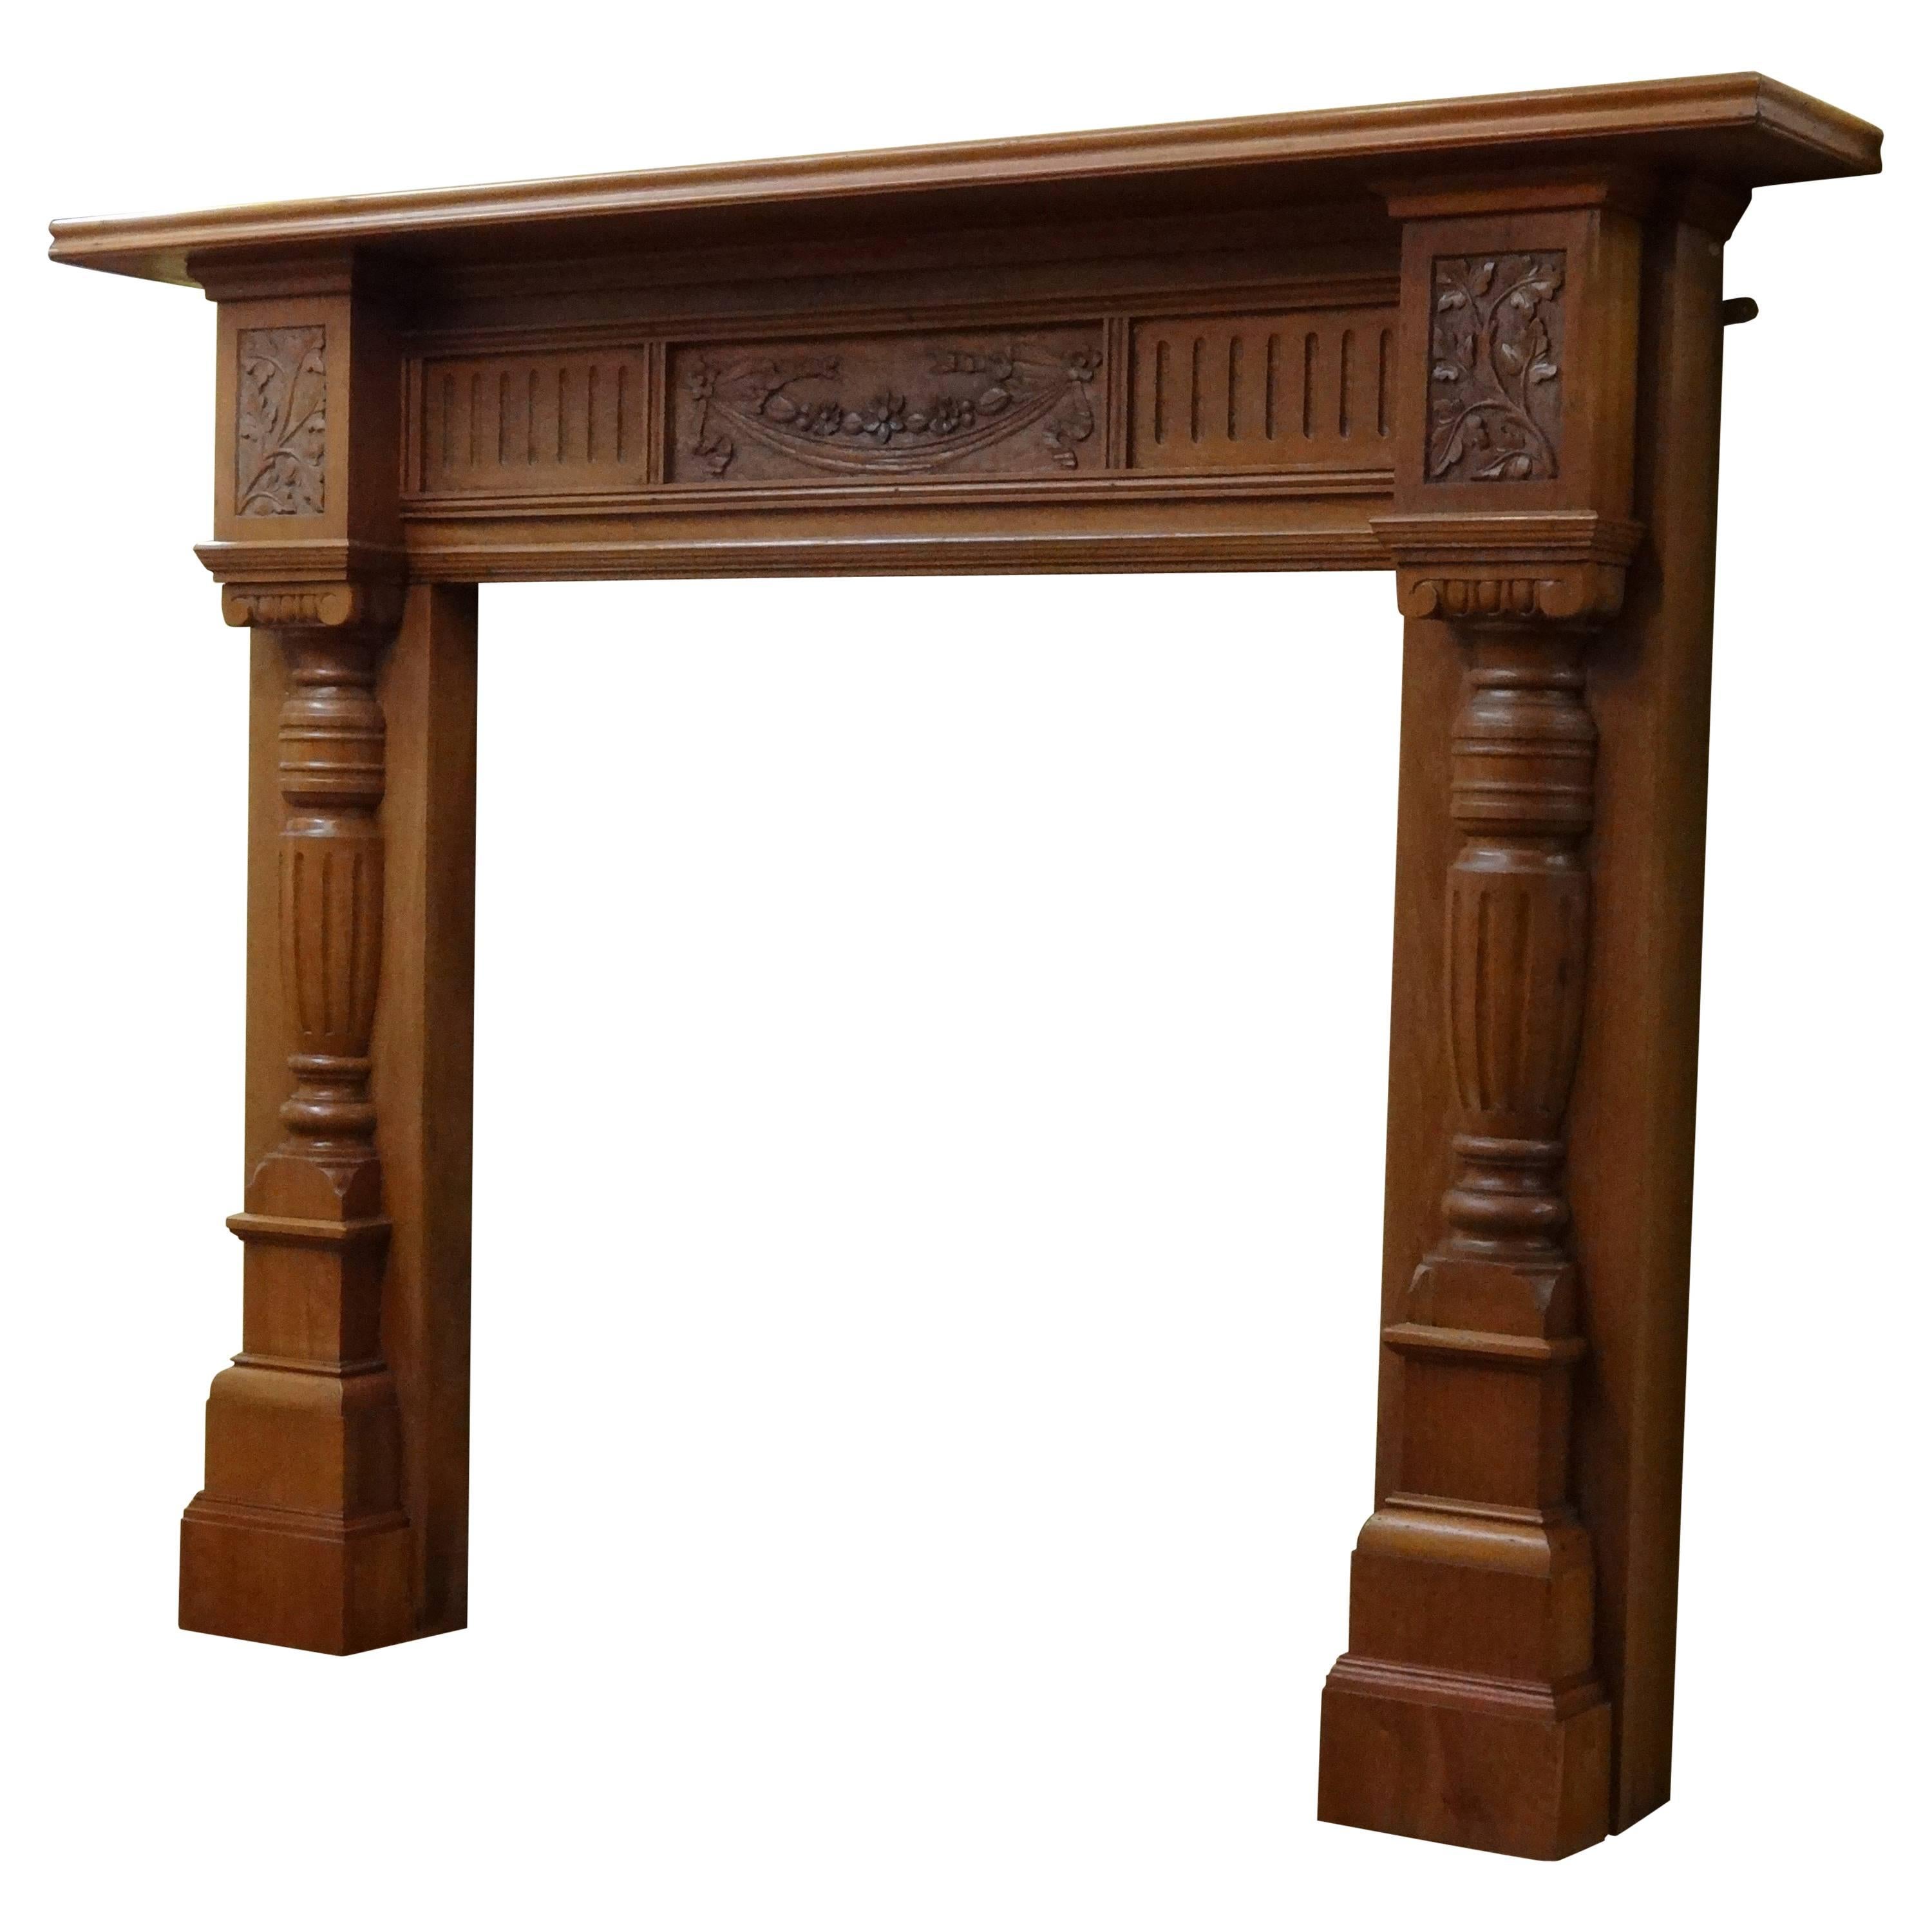 20th Century Edwardian Carved Mahogany Fireplace Surround For Sale